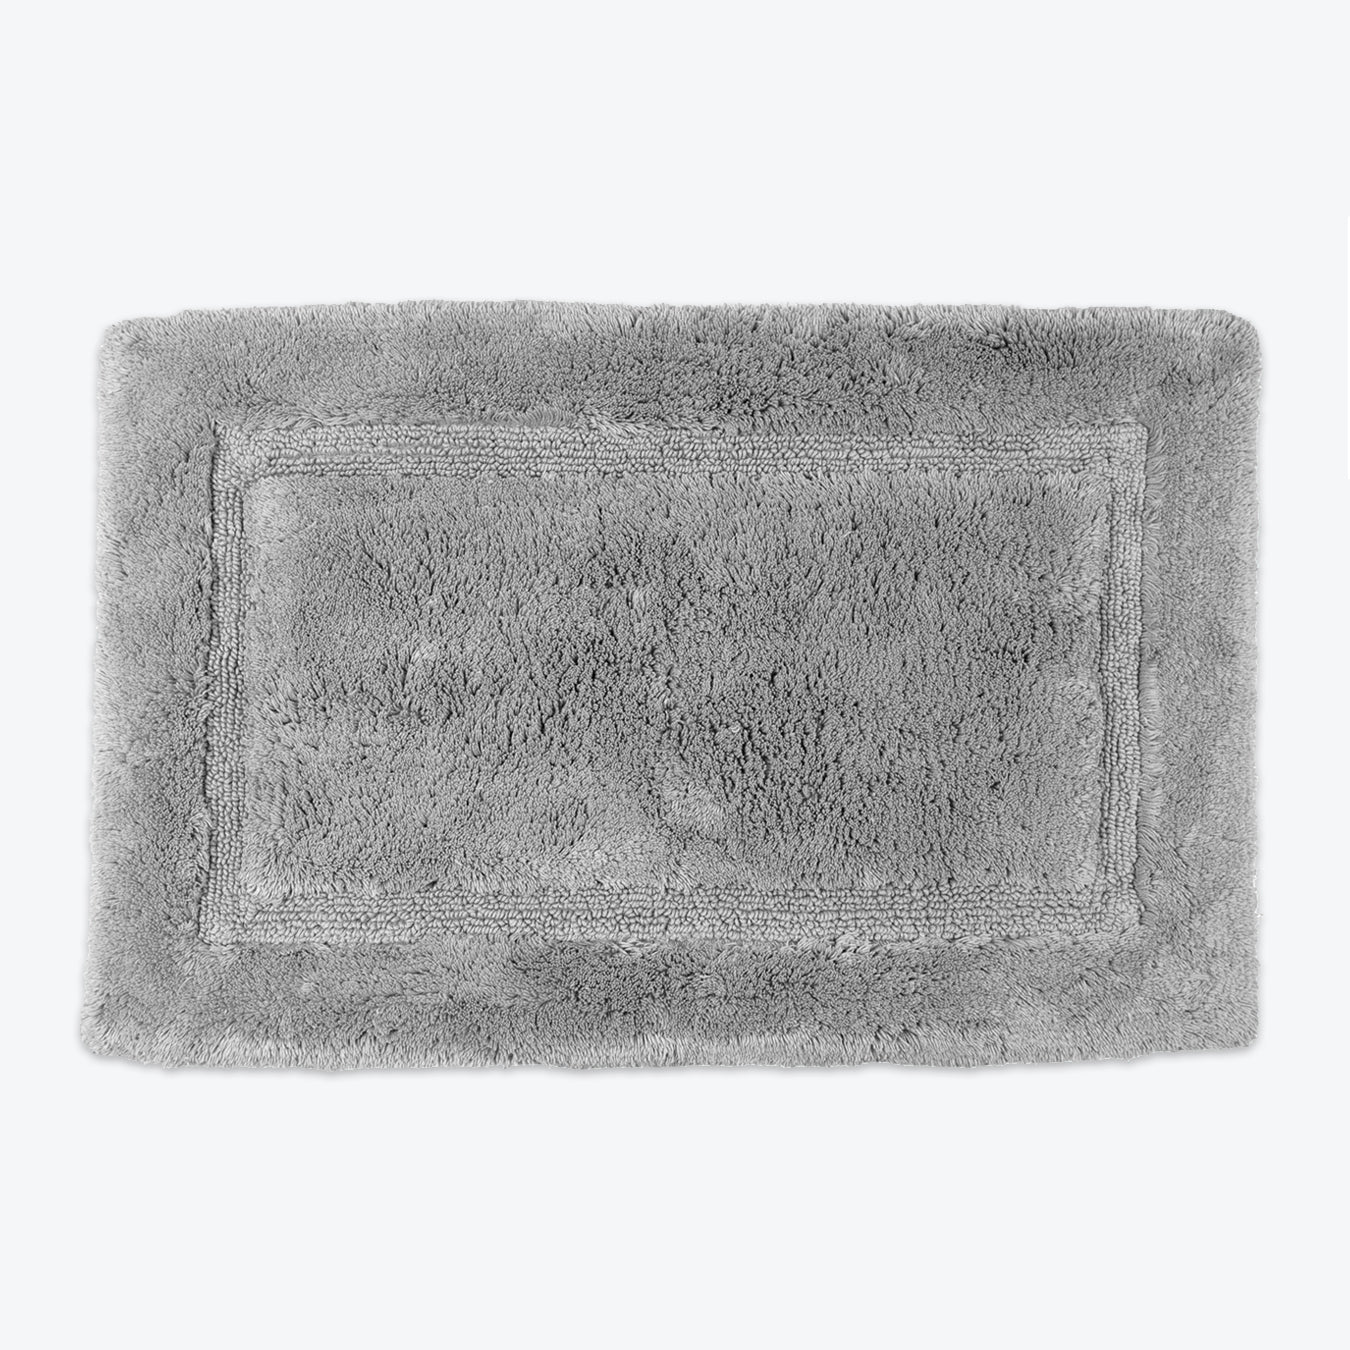 Silver Grey Bamboo Bath Mats - Super Soft and Hypo-Allergenic